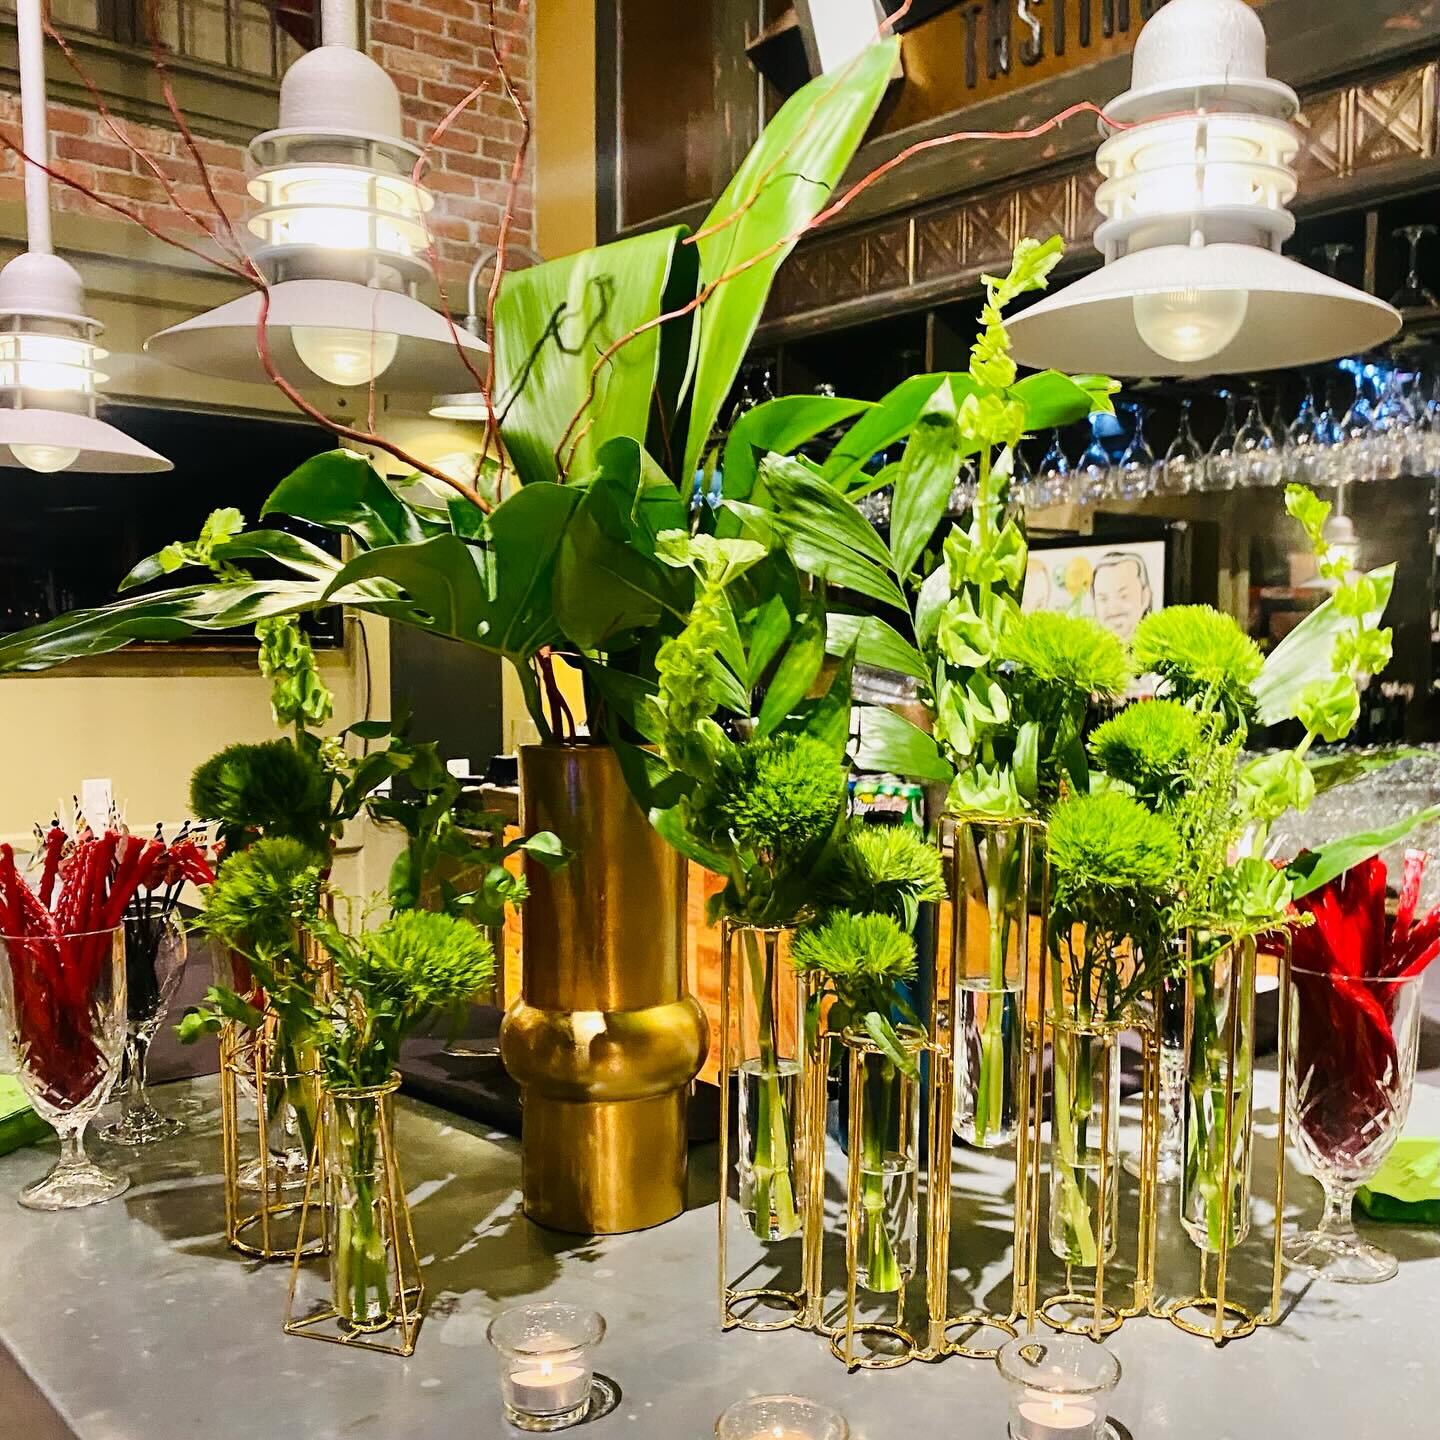 Thinking outside the box for this 80th Birthday celebration! 🌿🔲🪩 My client wanted a funky but classy 60s theme with all her husband&rsquo;s favorite things. 
Peter, Paul &amp; Mary Alive ✔️
Pucci ✔️
Warhol ✔️
Twizzlers, Swedish Fish &amp; Malted M